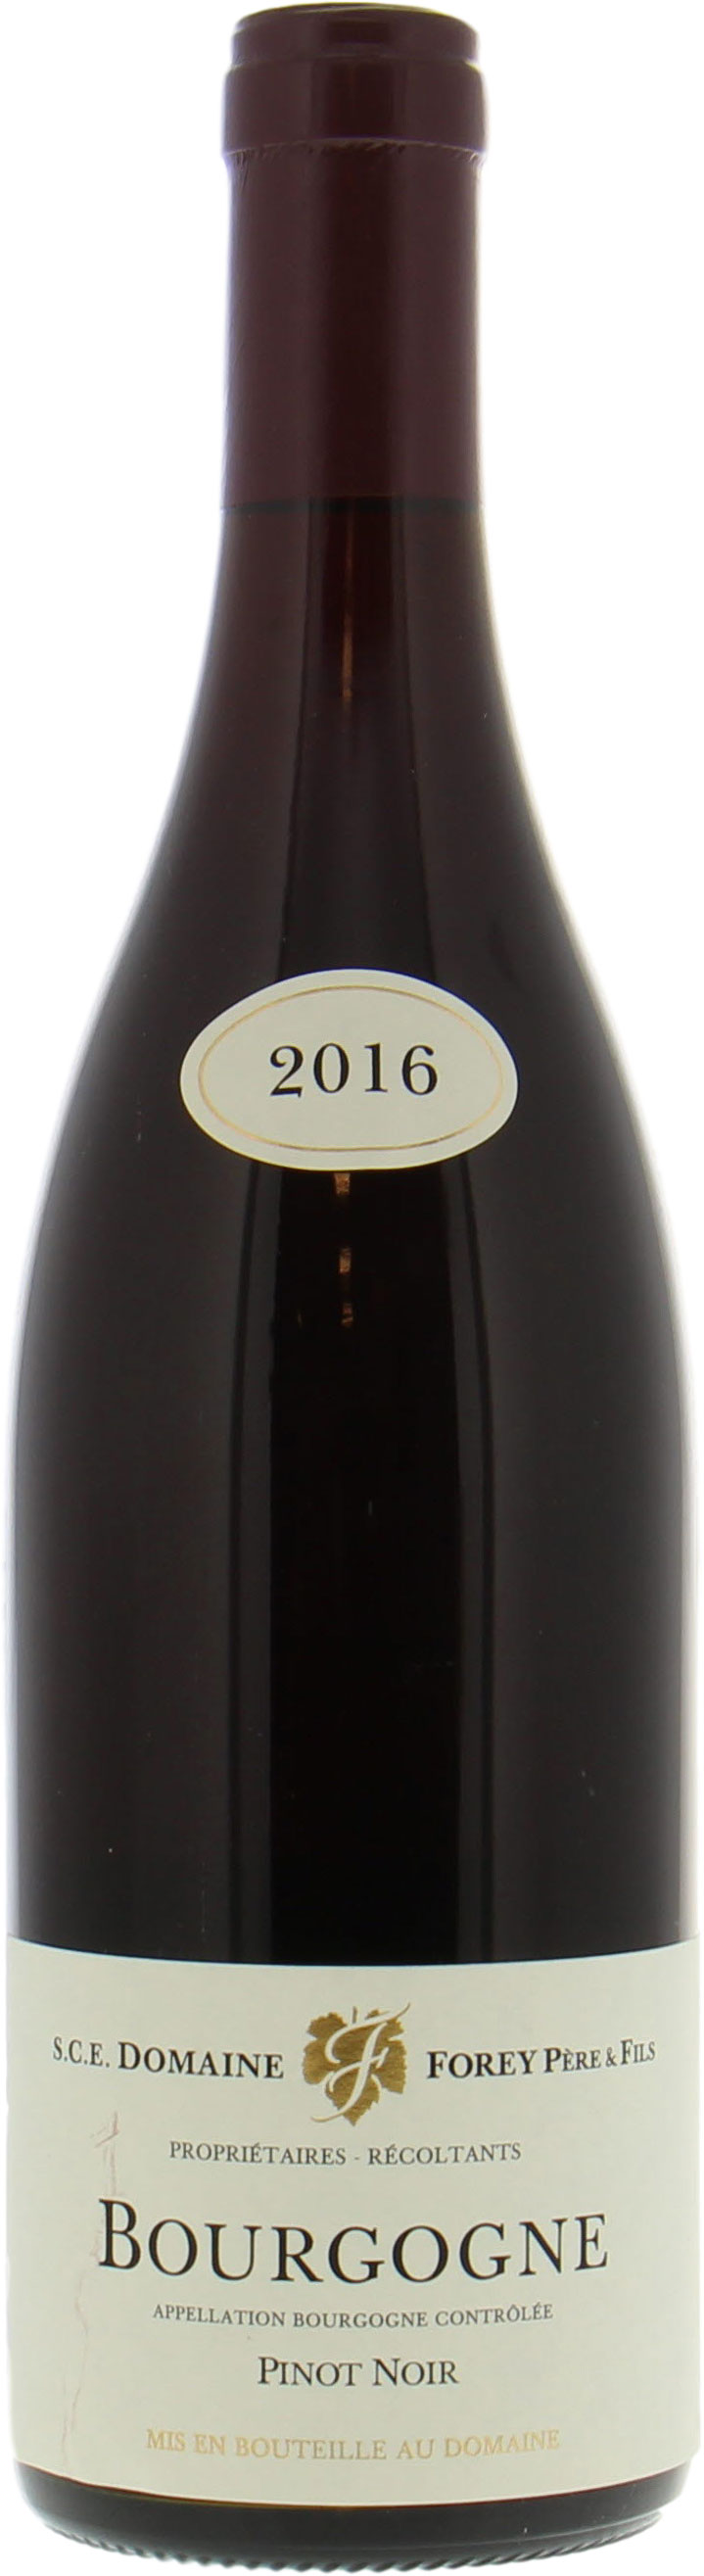 Domaine Forey Pere & Fils - Bourgogne Pinot Noir 2016 Perfect